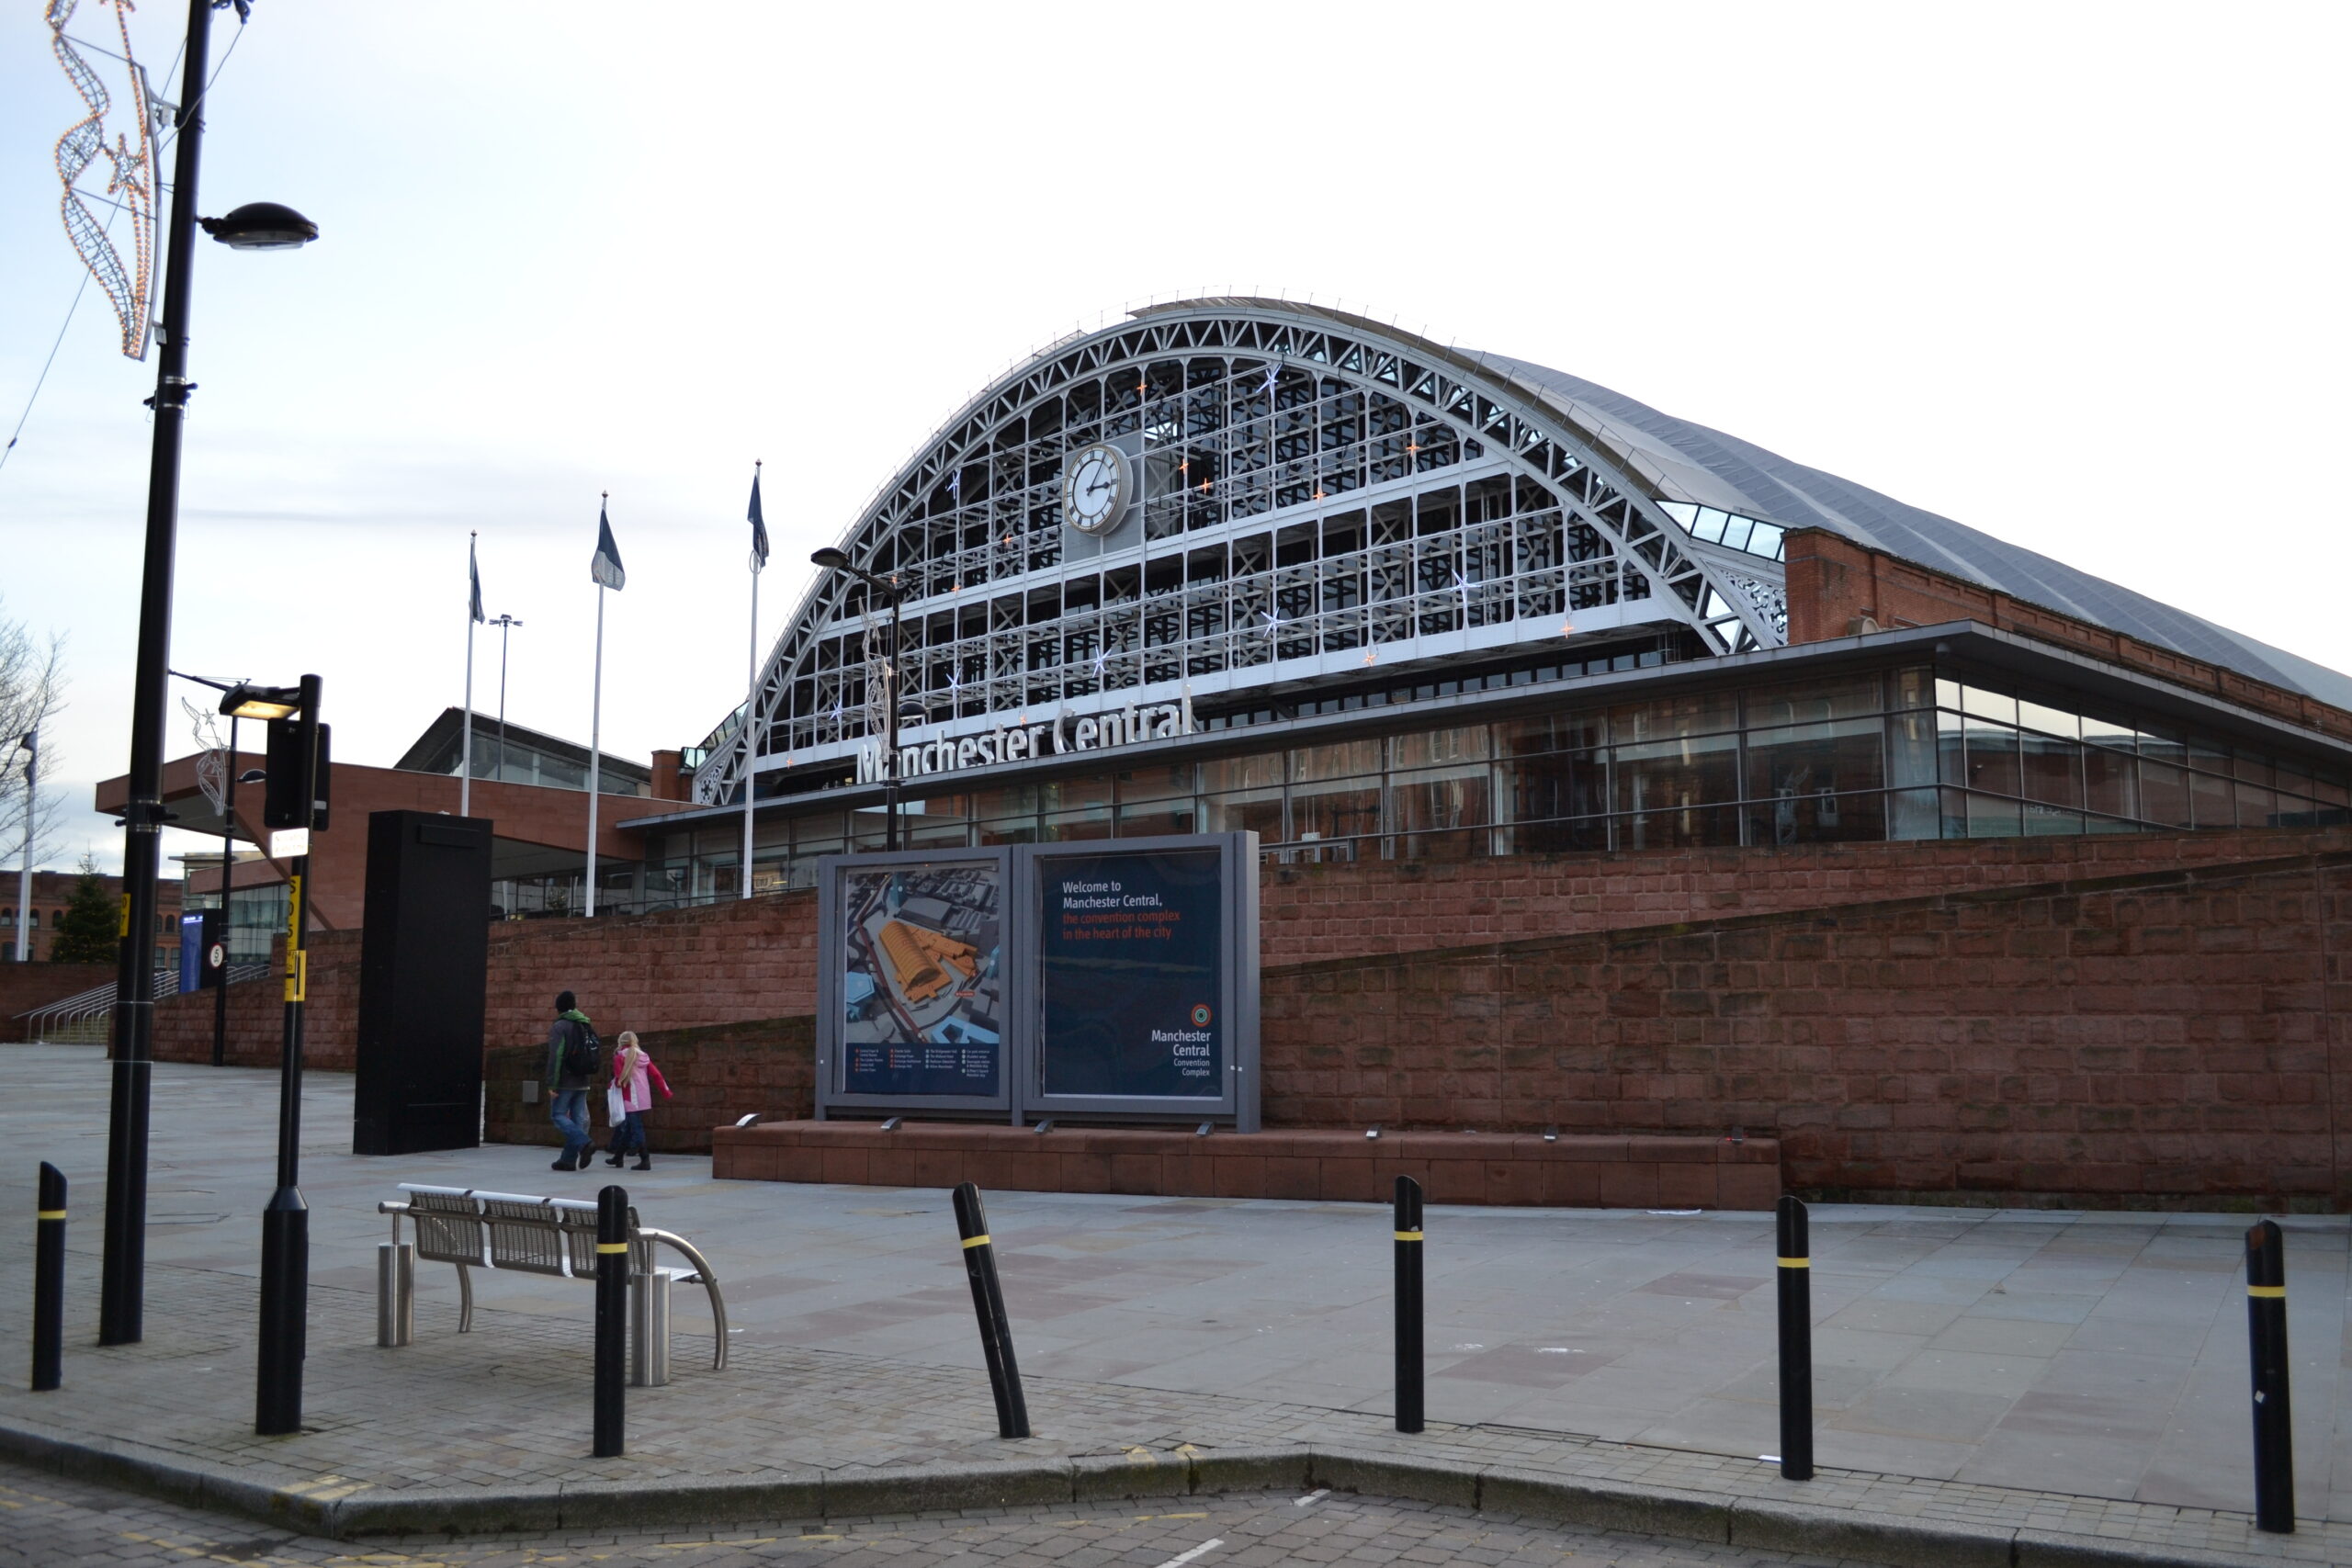 manchester central